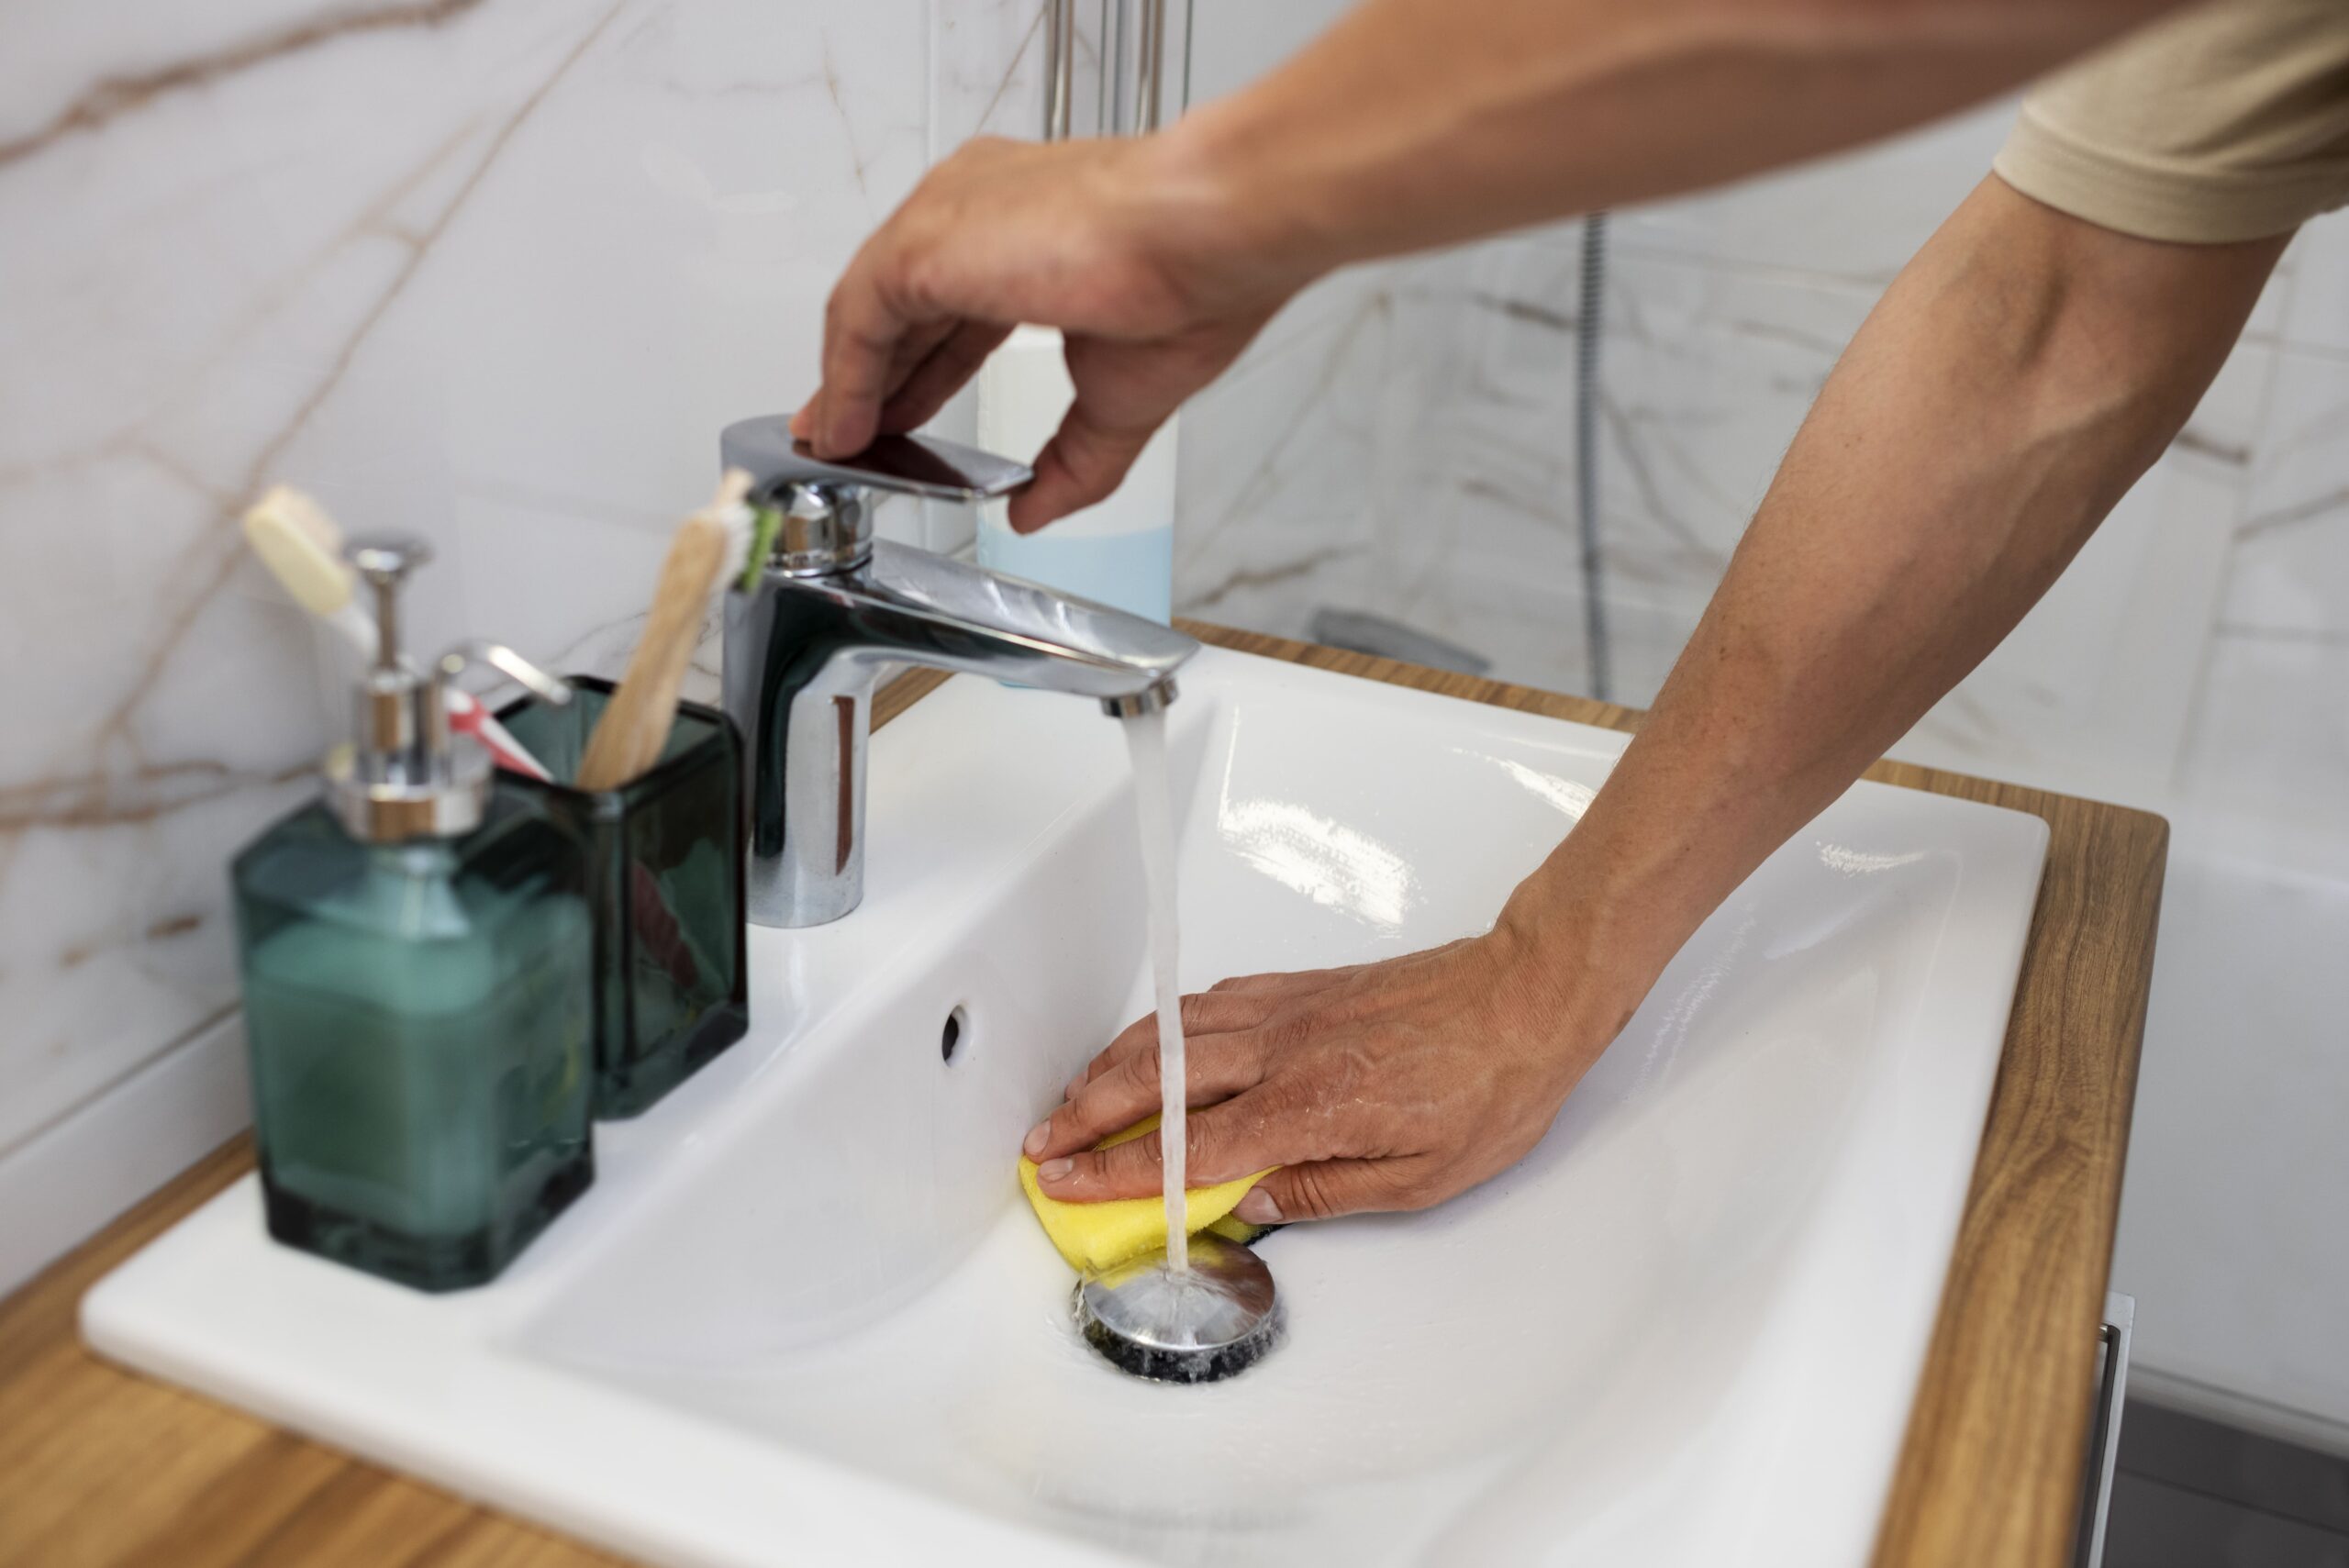 How to remove rust stains from a porcelain sink